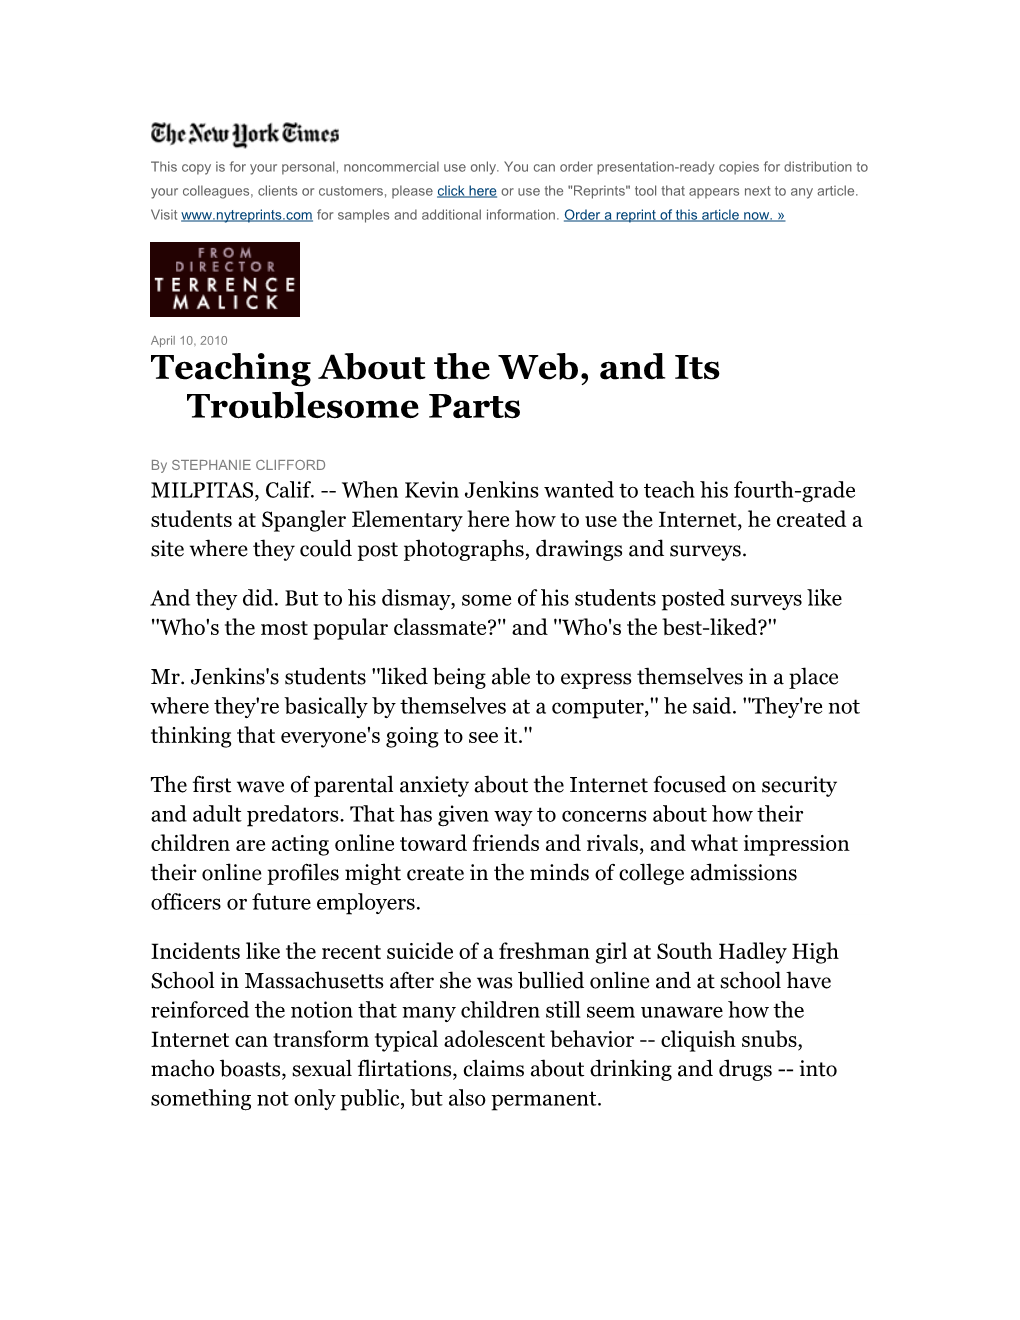 Teaching About the Web, and Its Troublesome Parts